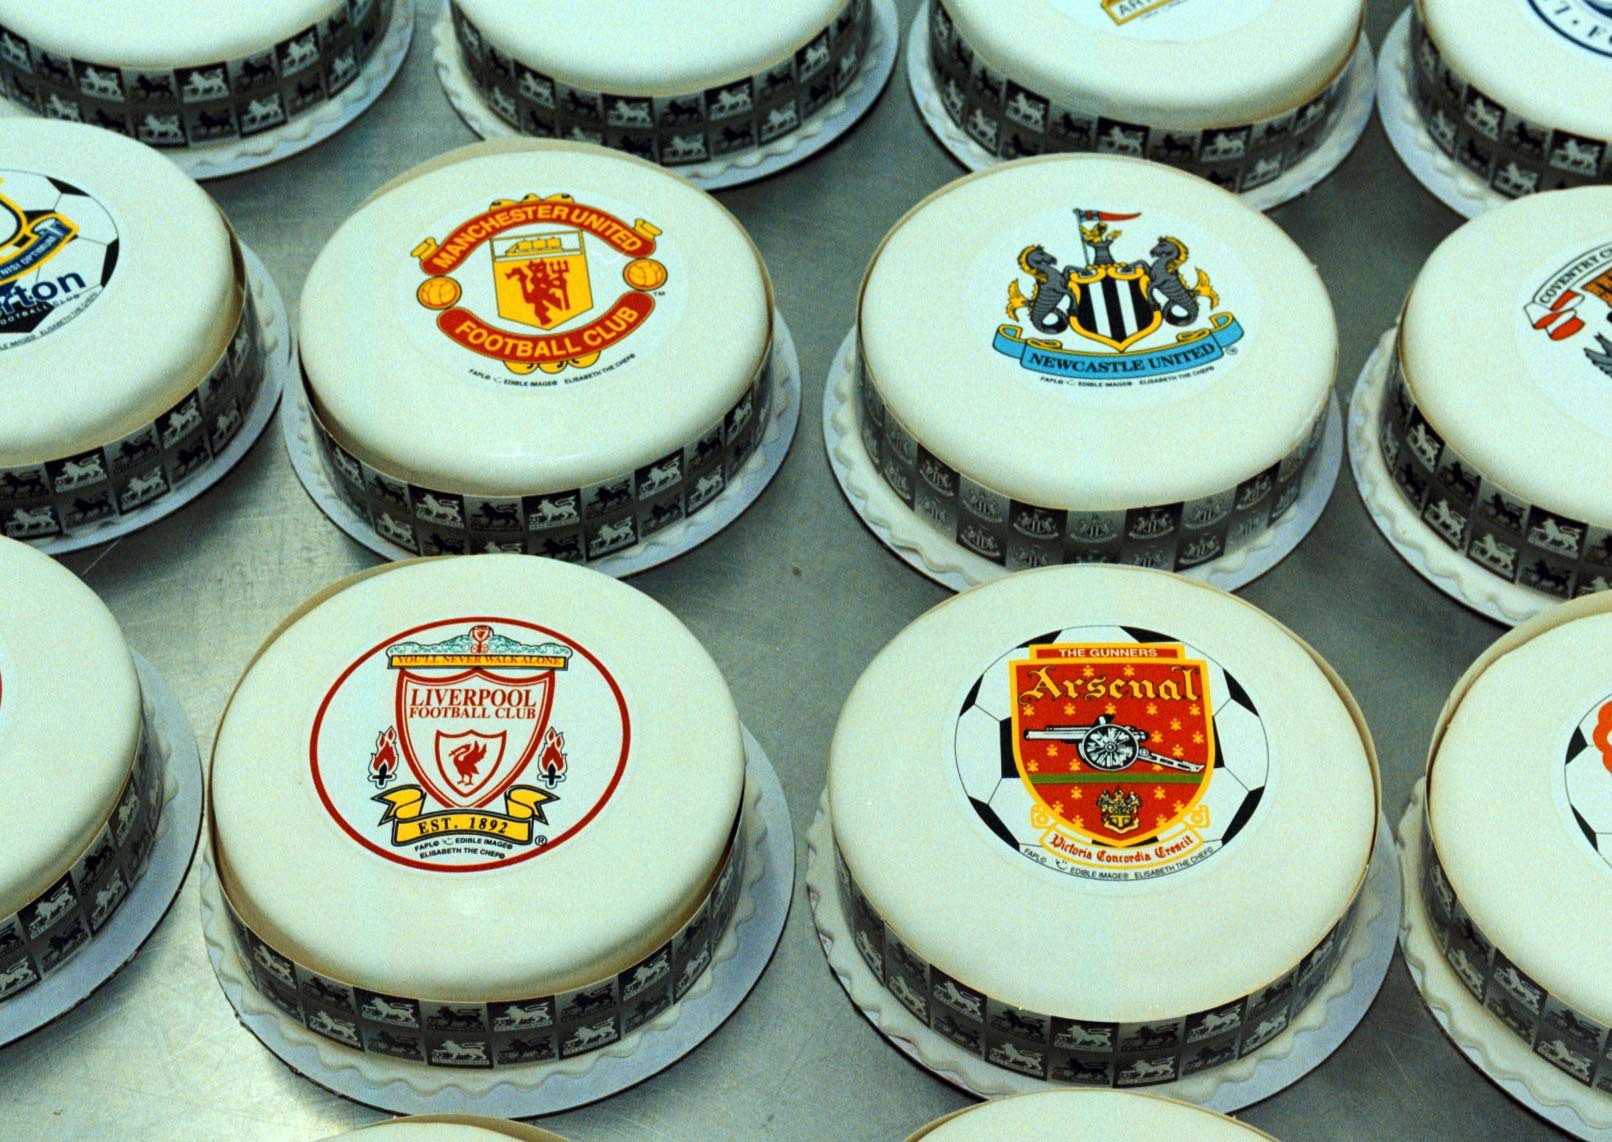 A selection of the FA Premier League club cakes at Elisabeth the Chef bakers in Worcester